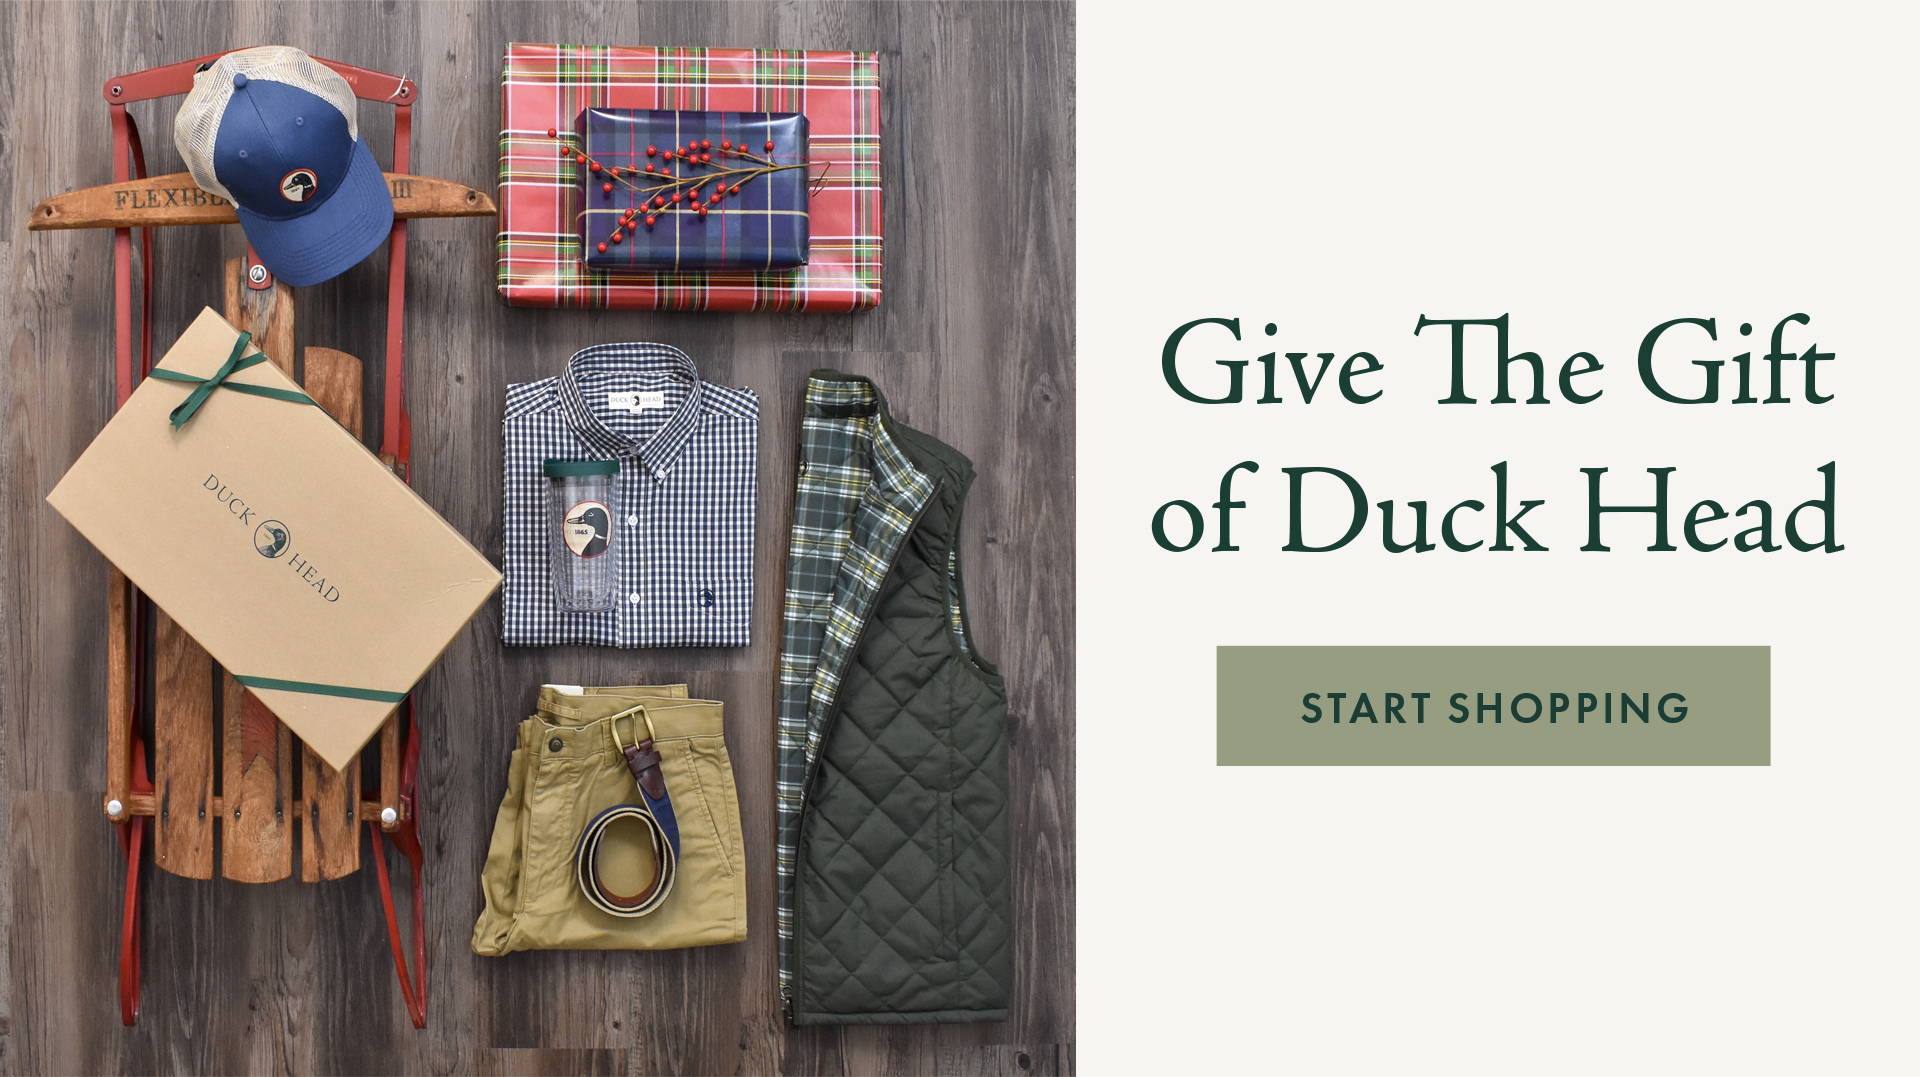 Give the Gift of Duck Head